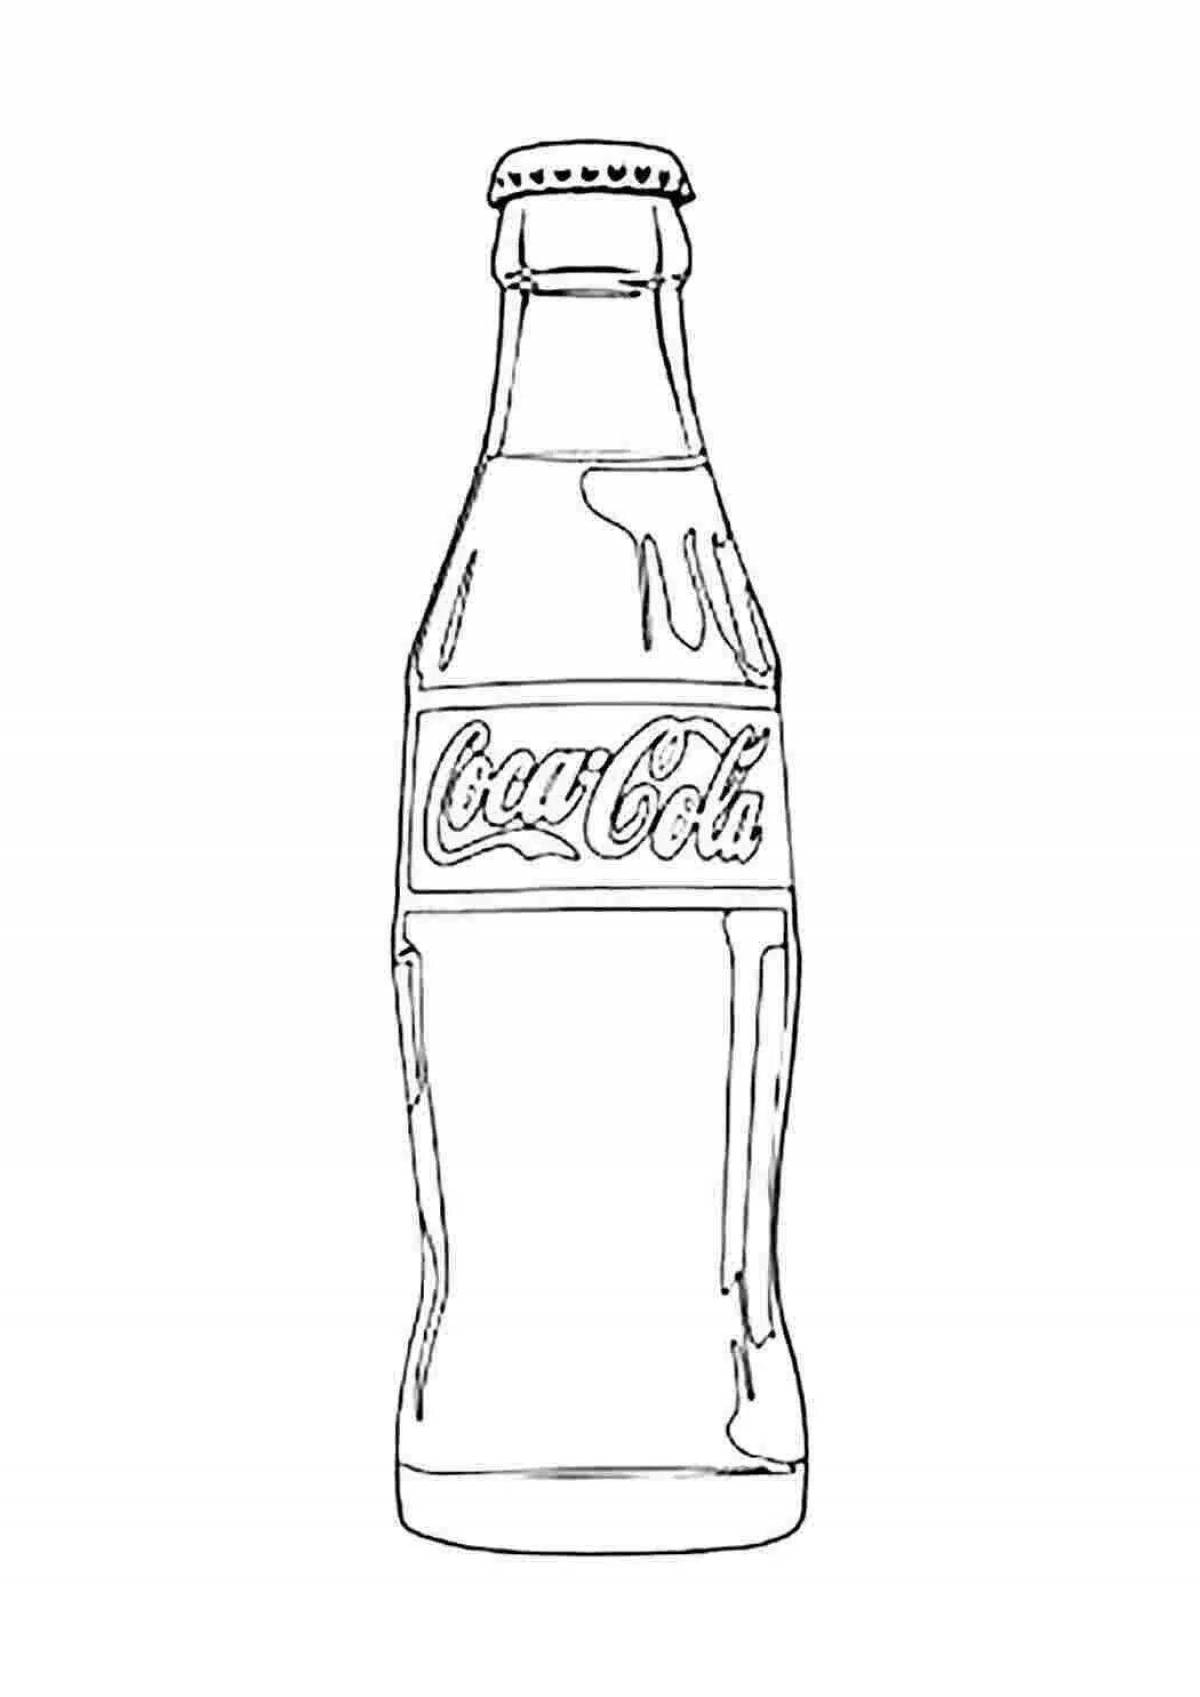 Fun bottle coloring page for kids